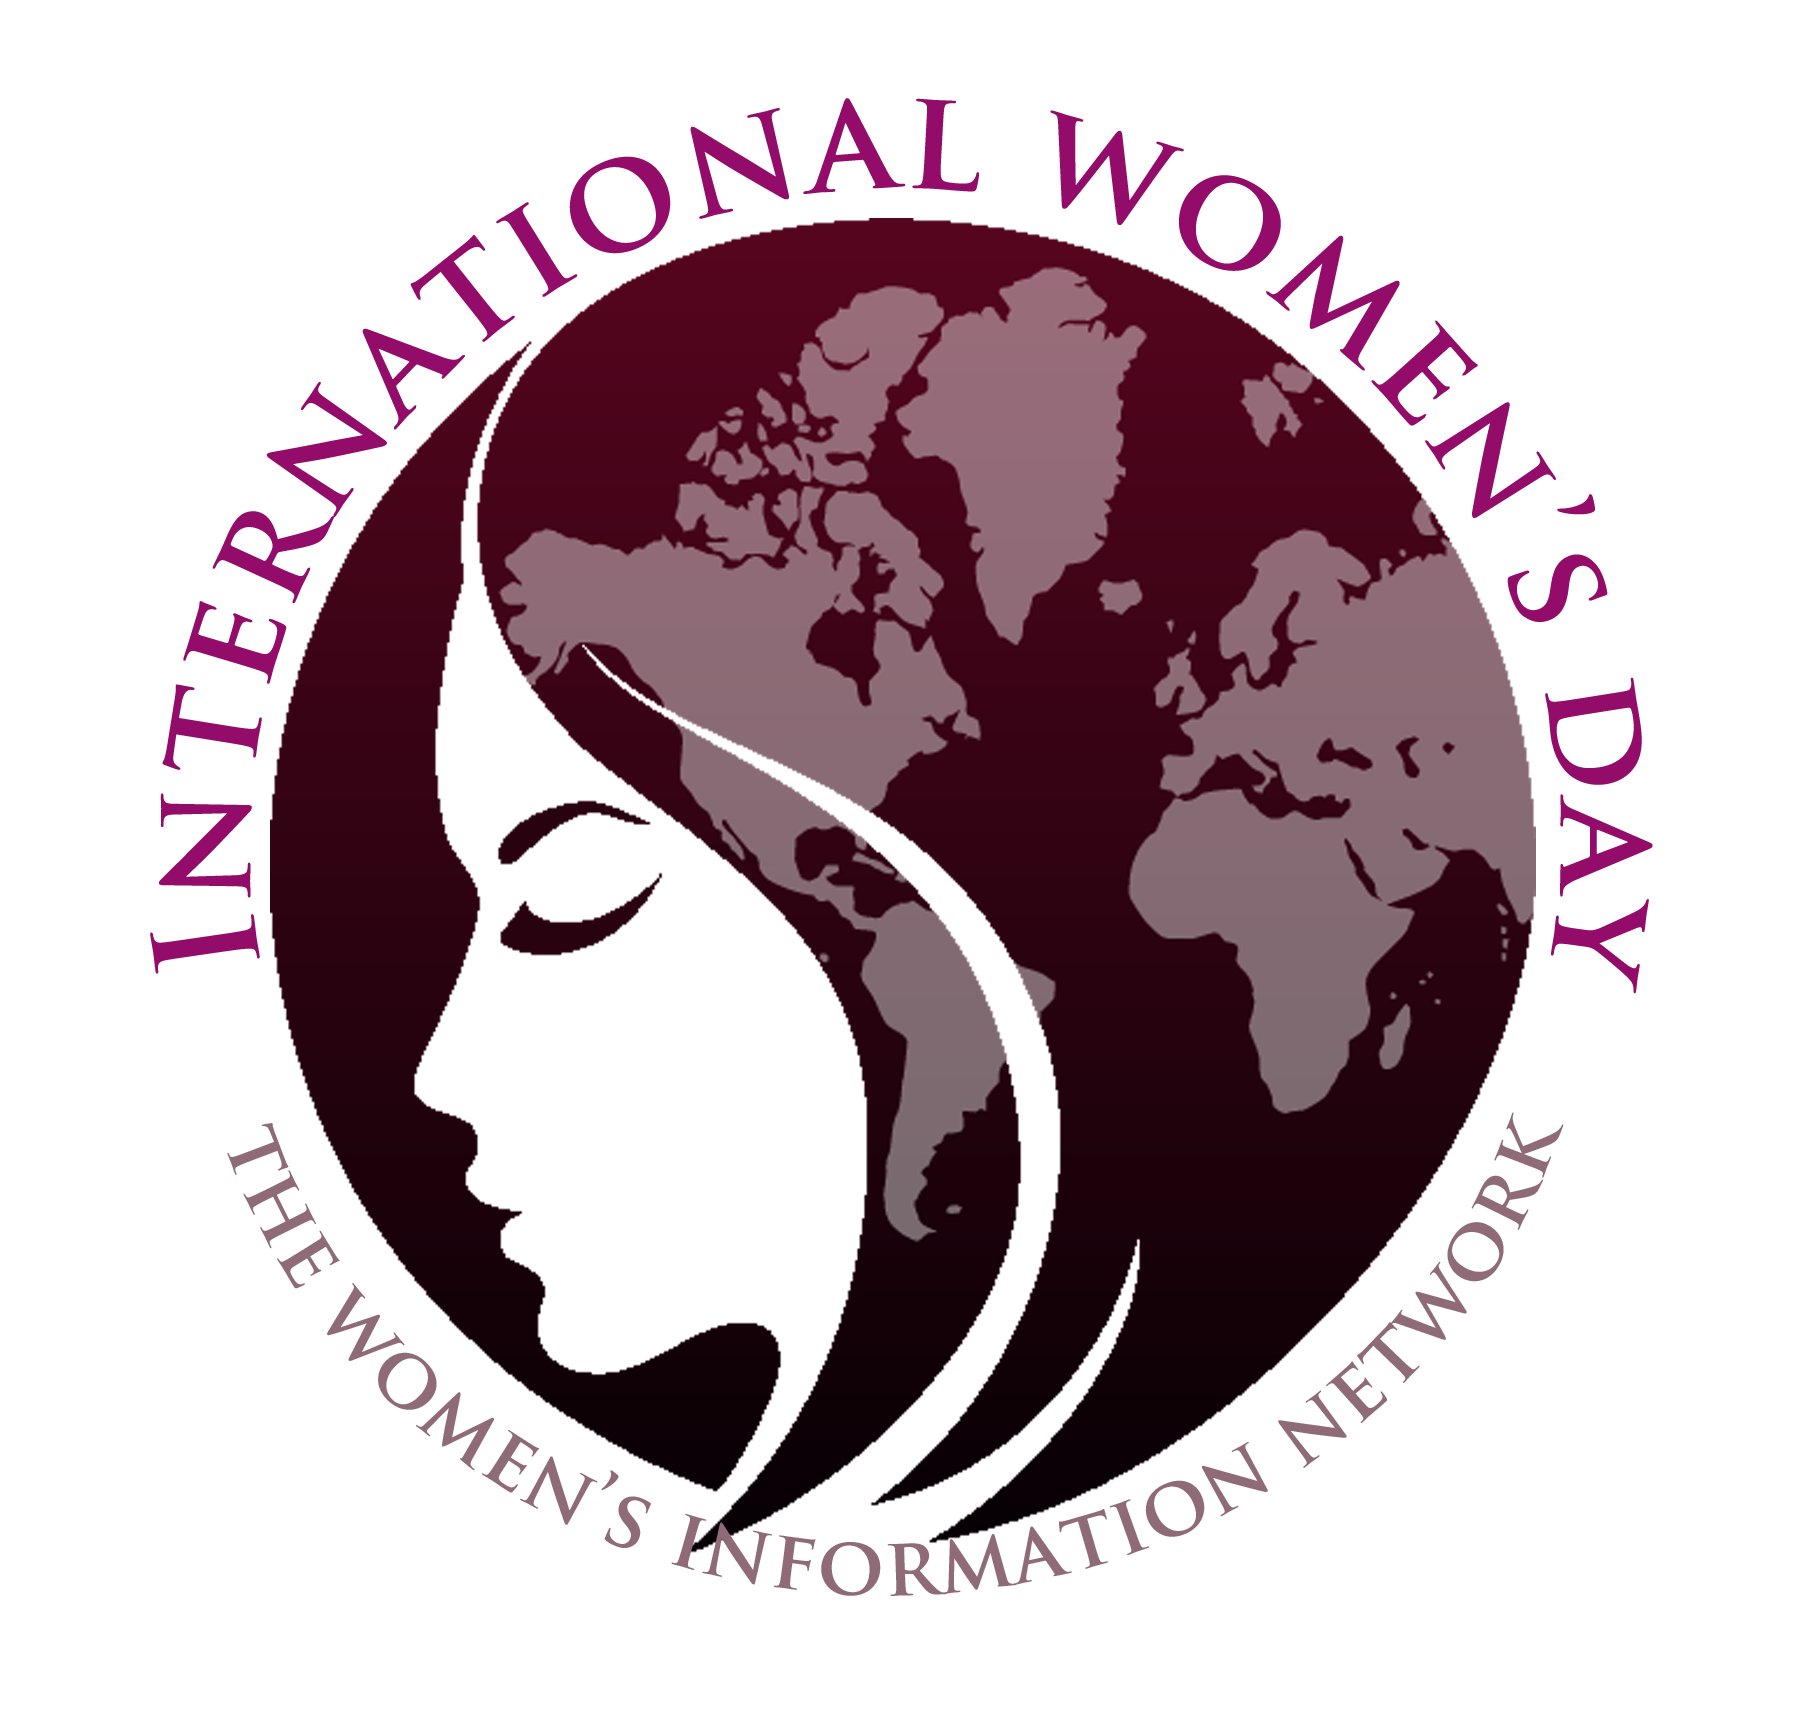 Celebrate International Womens Day March 8th 2021